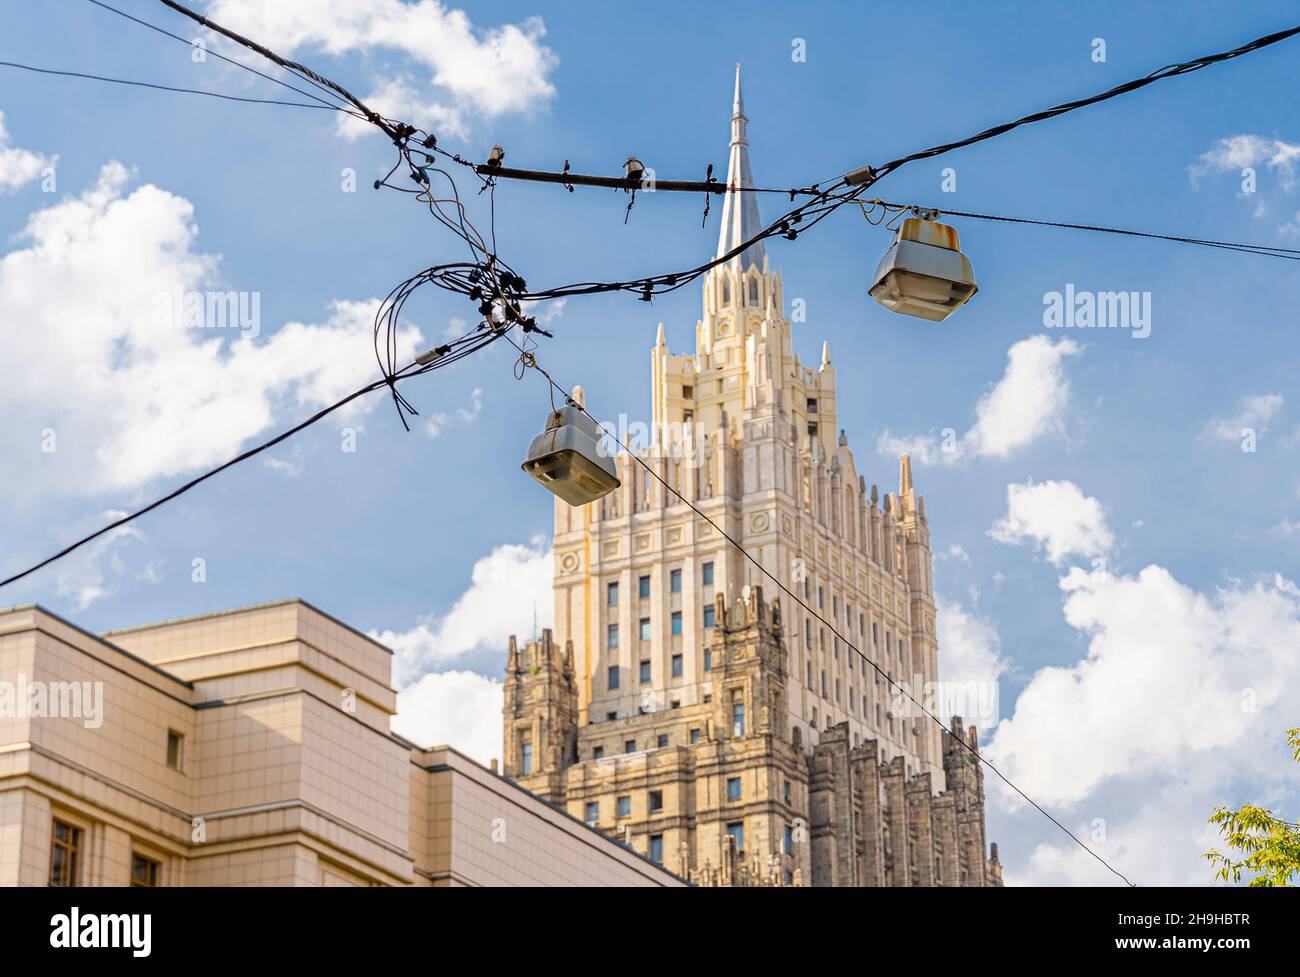 Old hanging streetlamps on cables or wires suspended above the road. One of Moscow Stalinist highrises in background. Russia Stock Photo